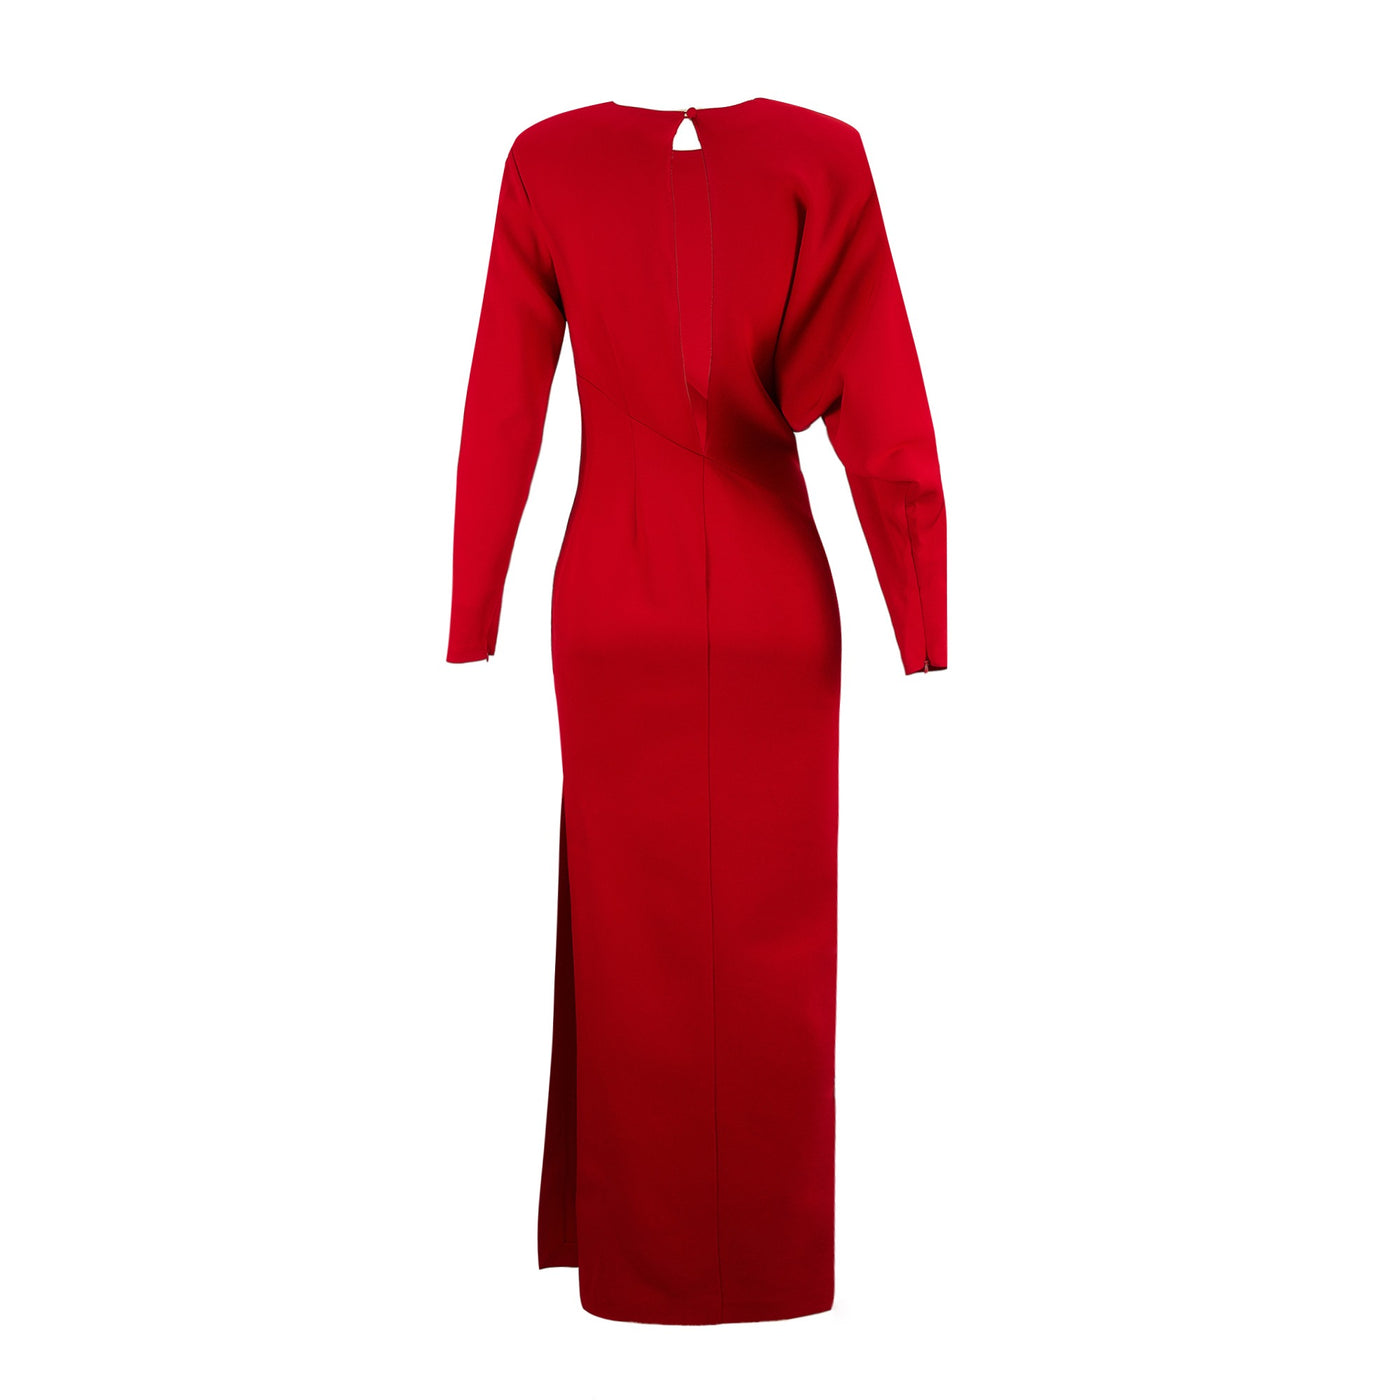 ROLAND-MOURET-Long-Sleeve-Stretch-Cady-Dress-Maxi-Red-02